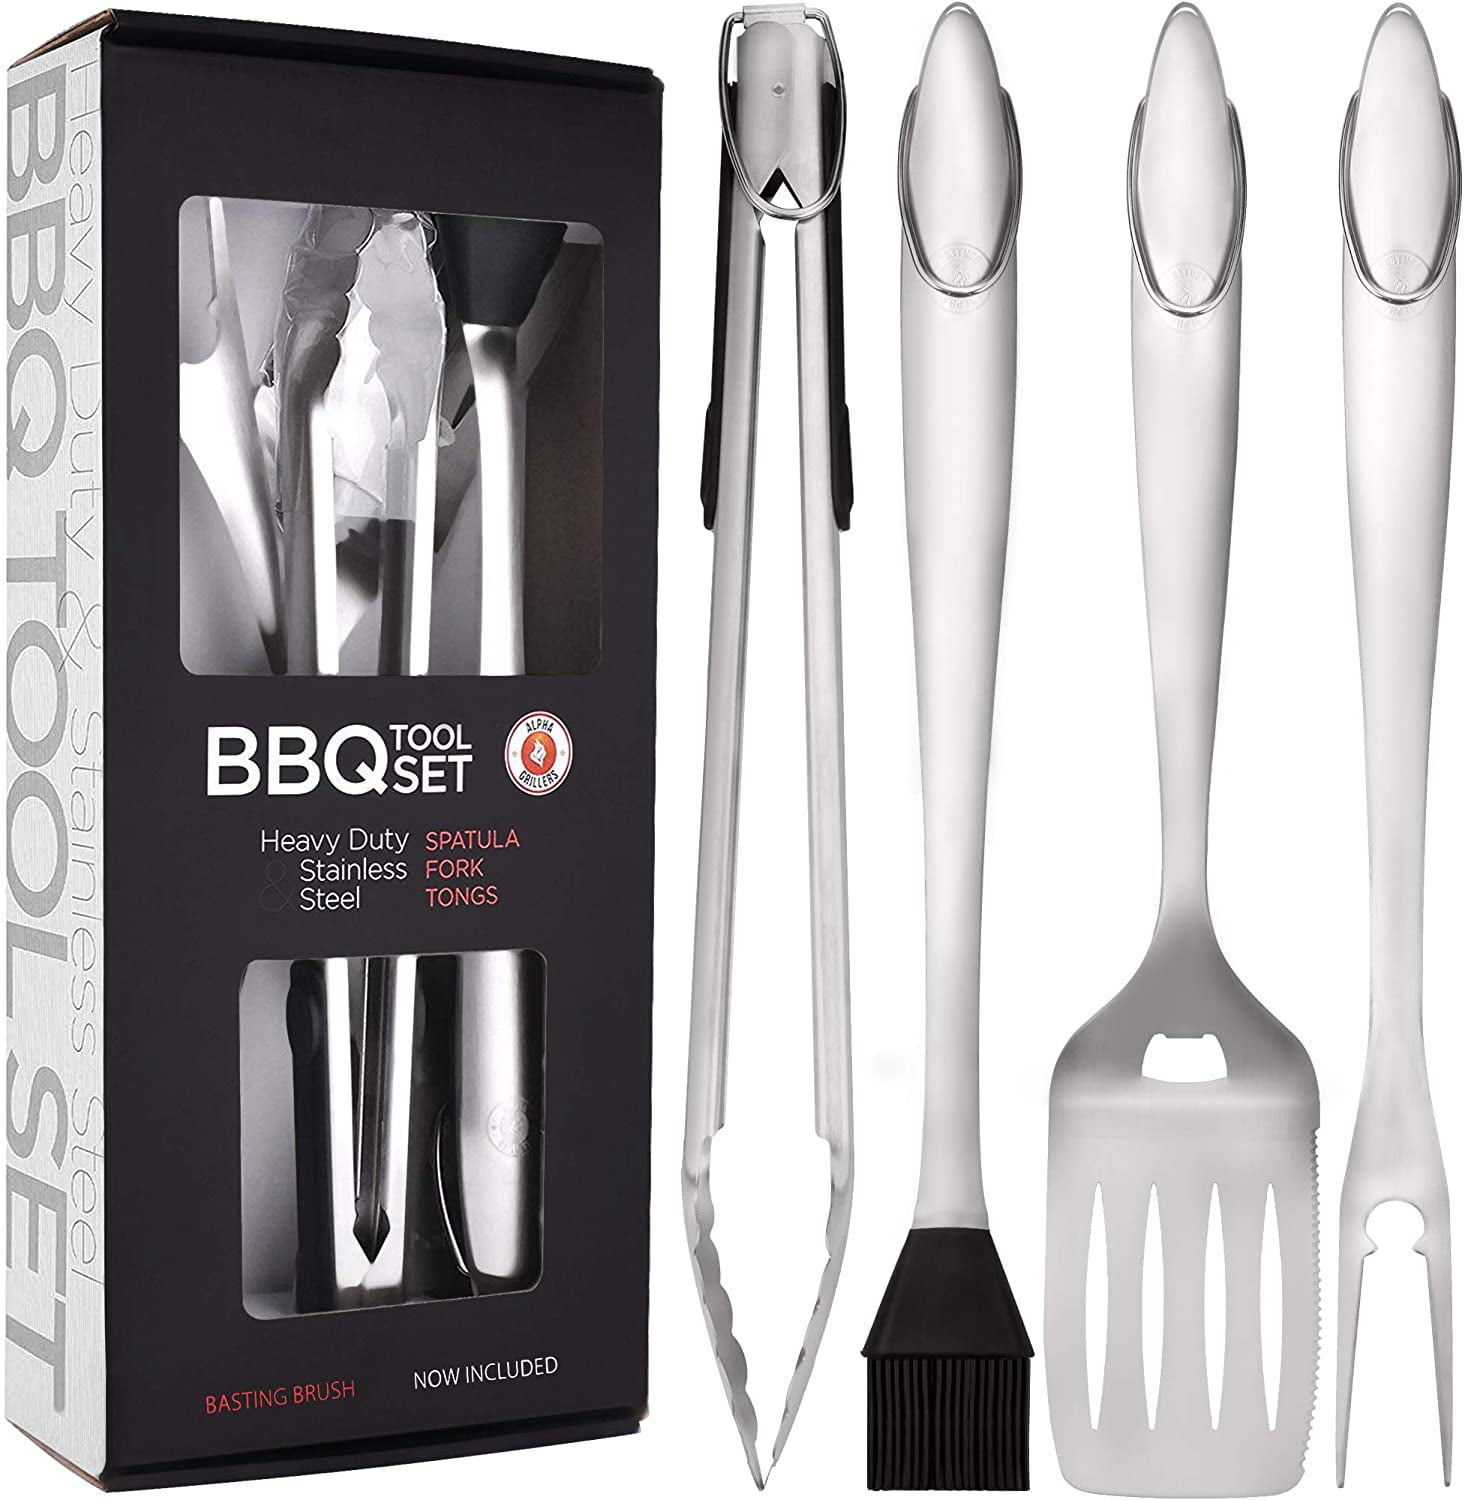 Heavy Duty BBQ Grilling Tools Set. Extra Thick Stainless Steel